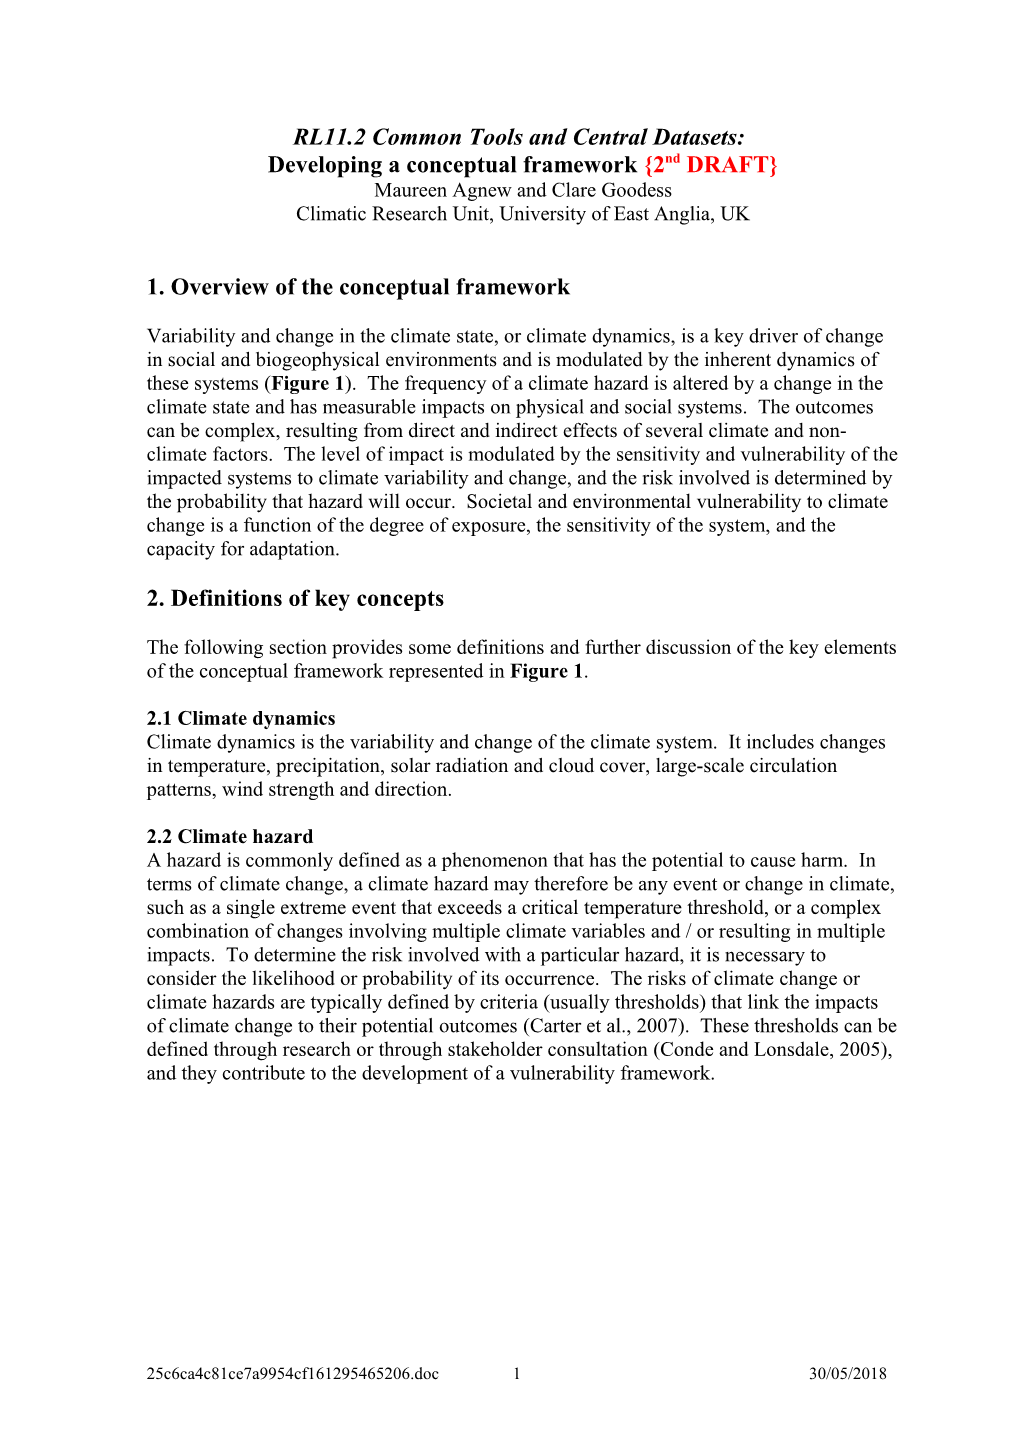 Conceptual Framework: Definitions for Key Concepts